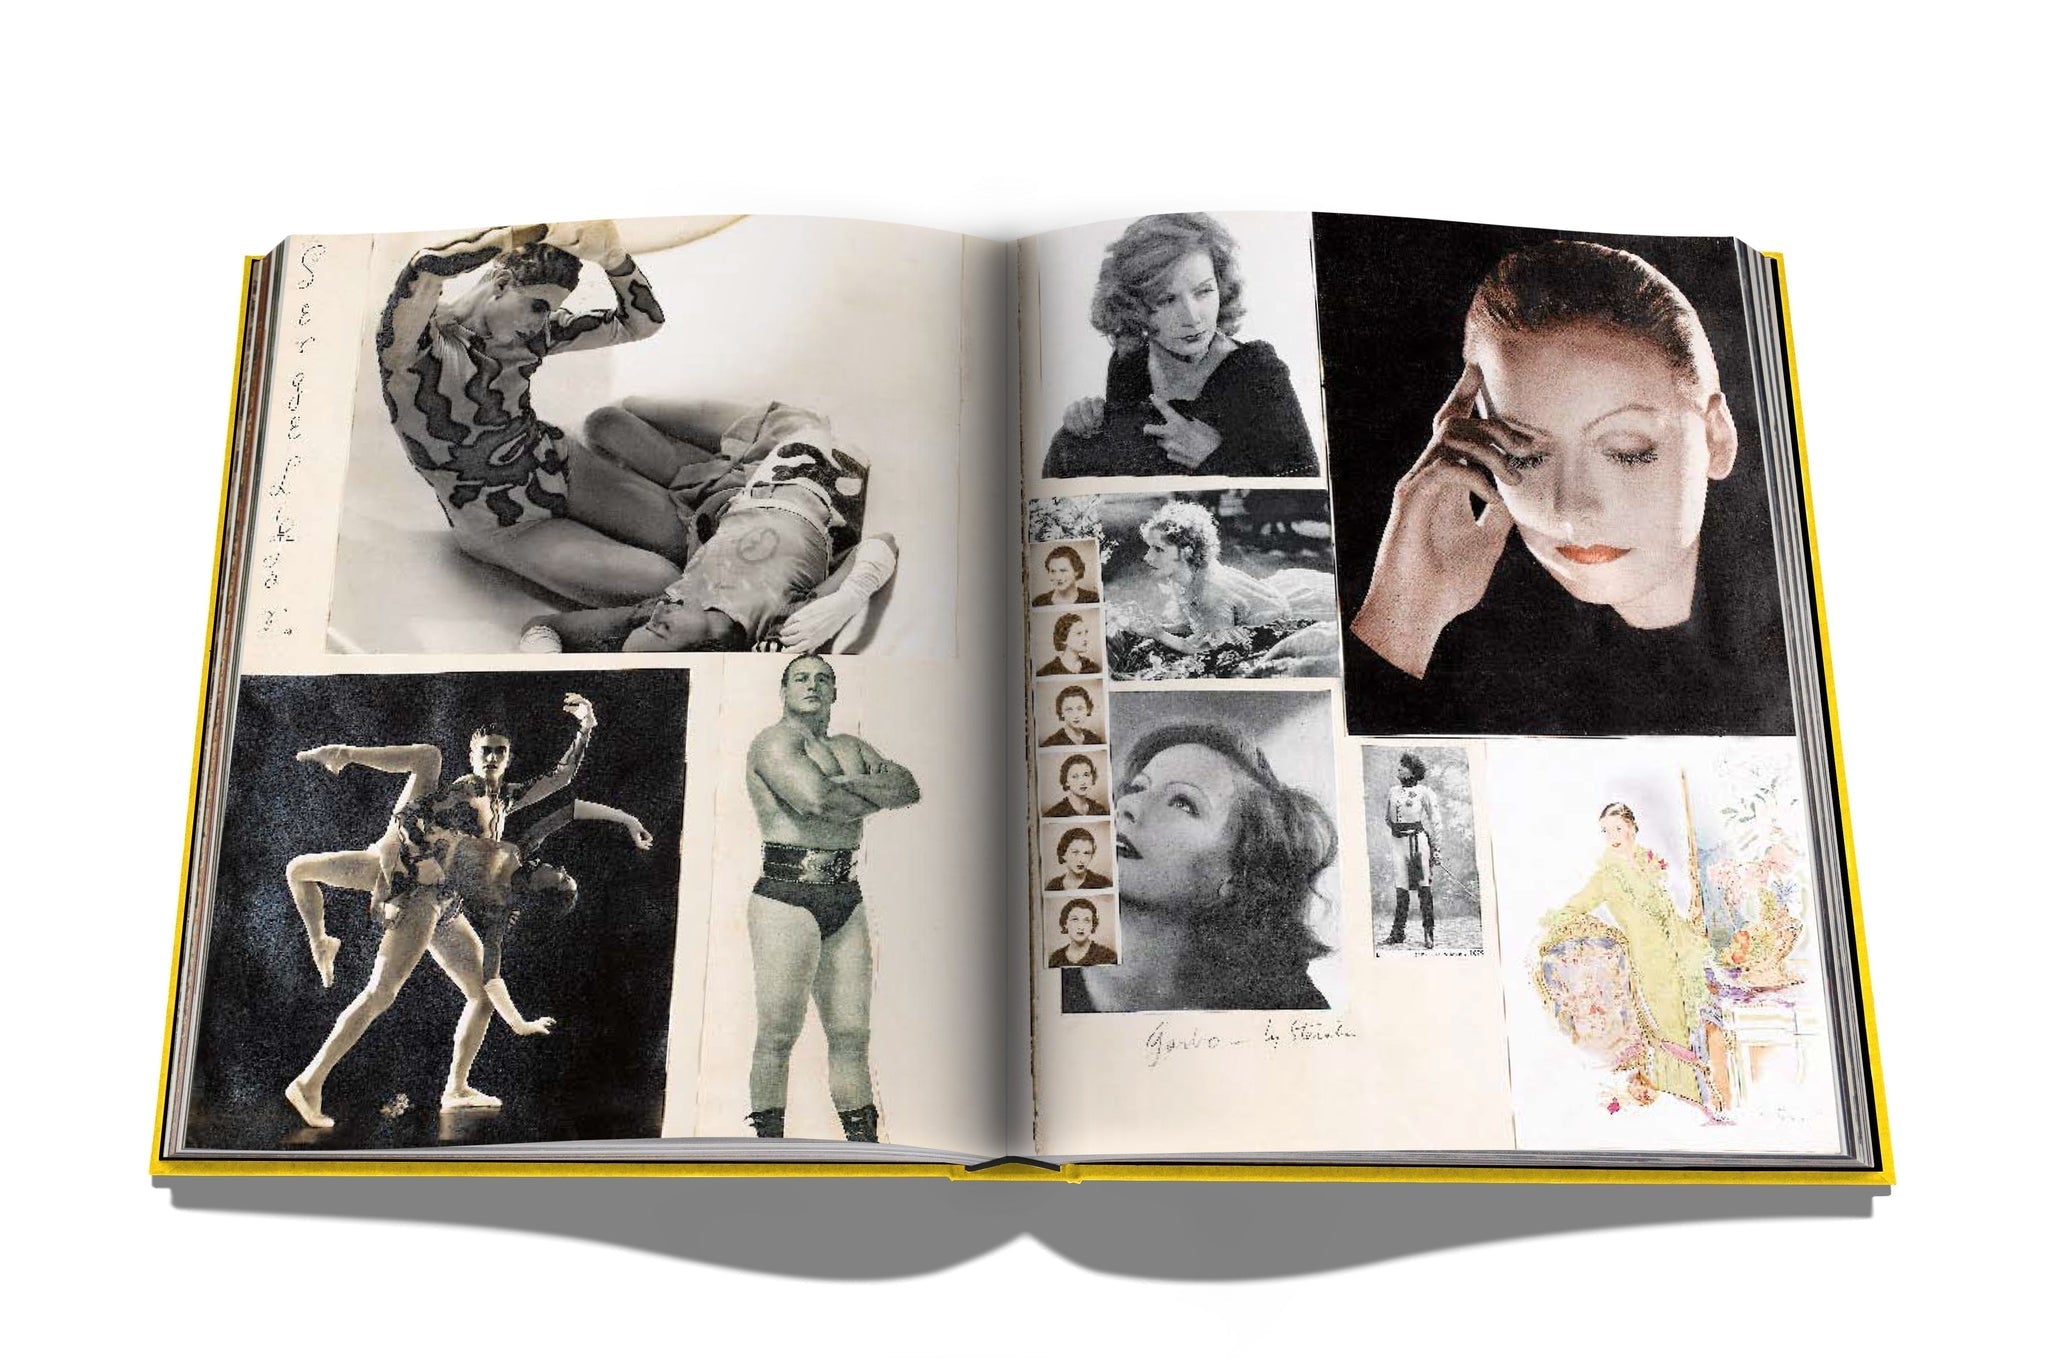 Assoulline Cecil Beaton: The Art of the Scrapbook